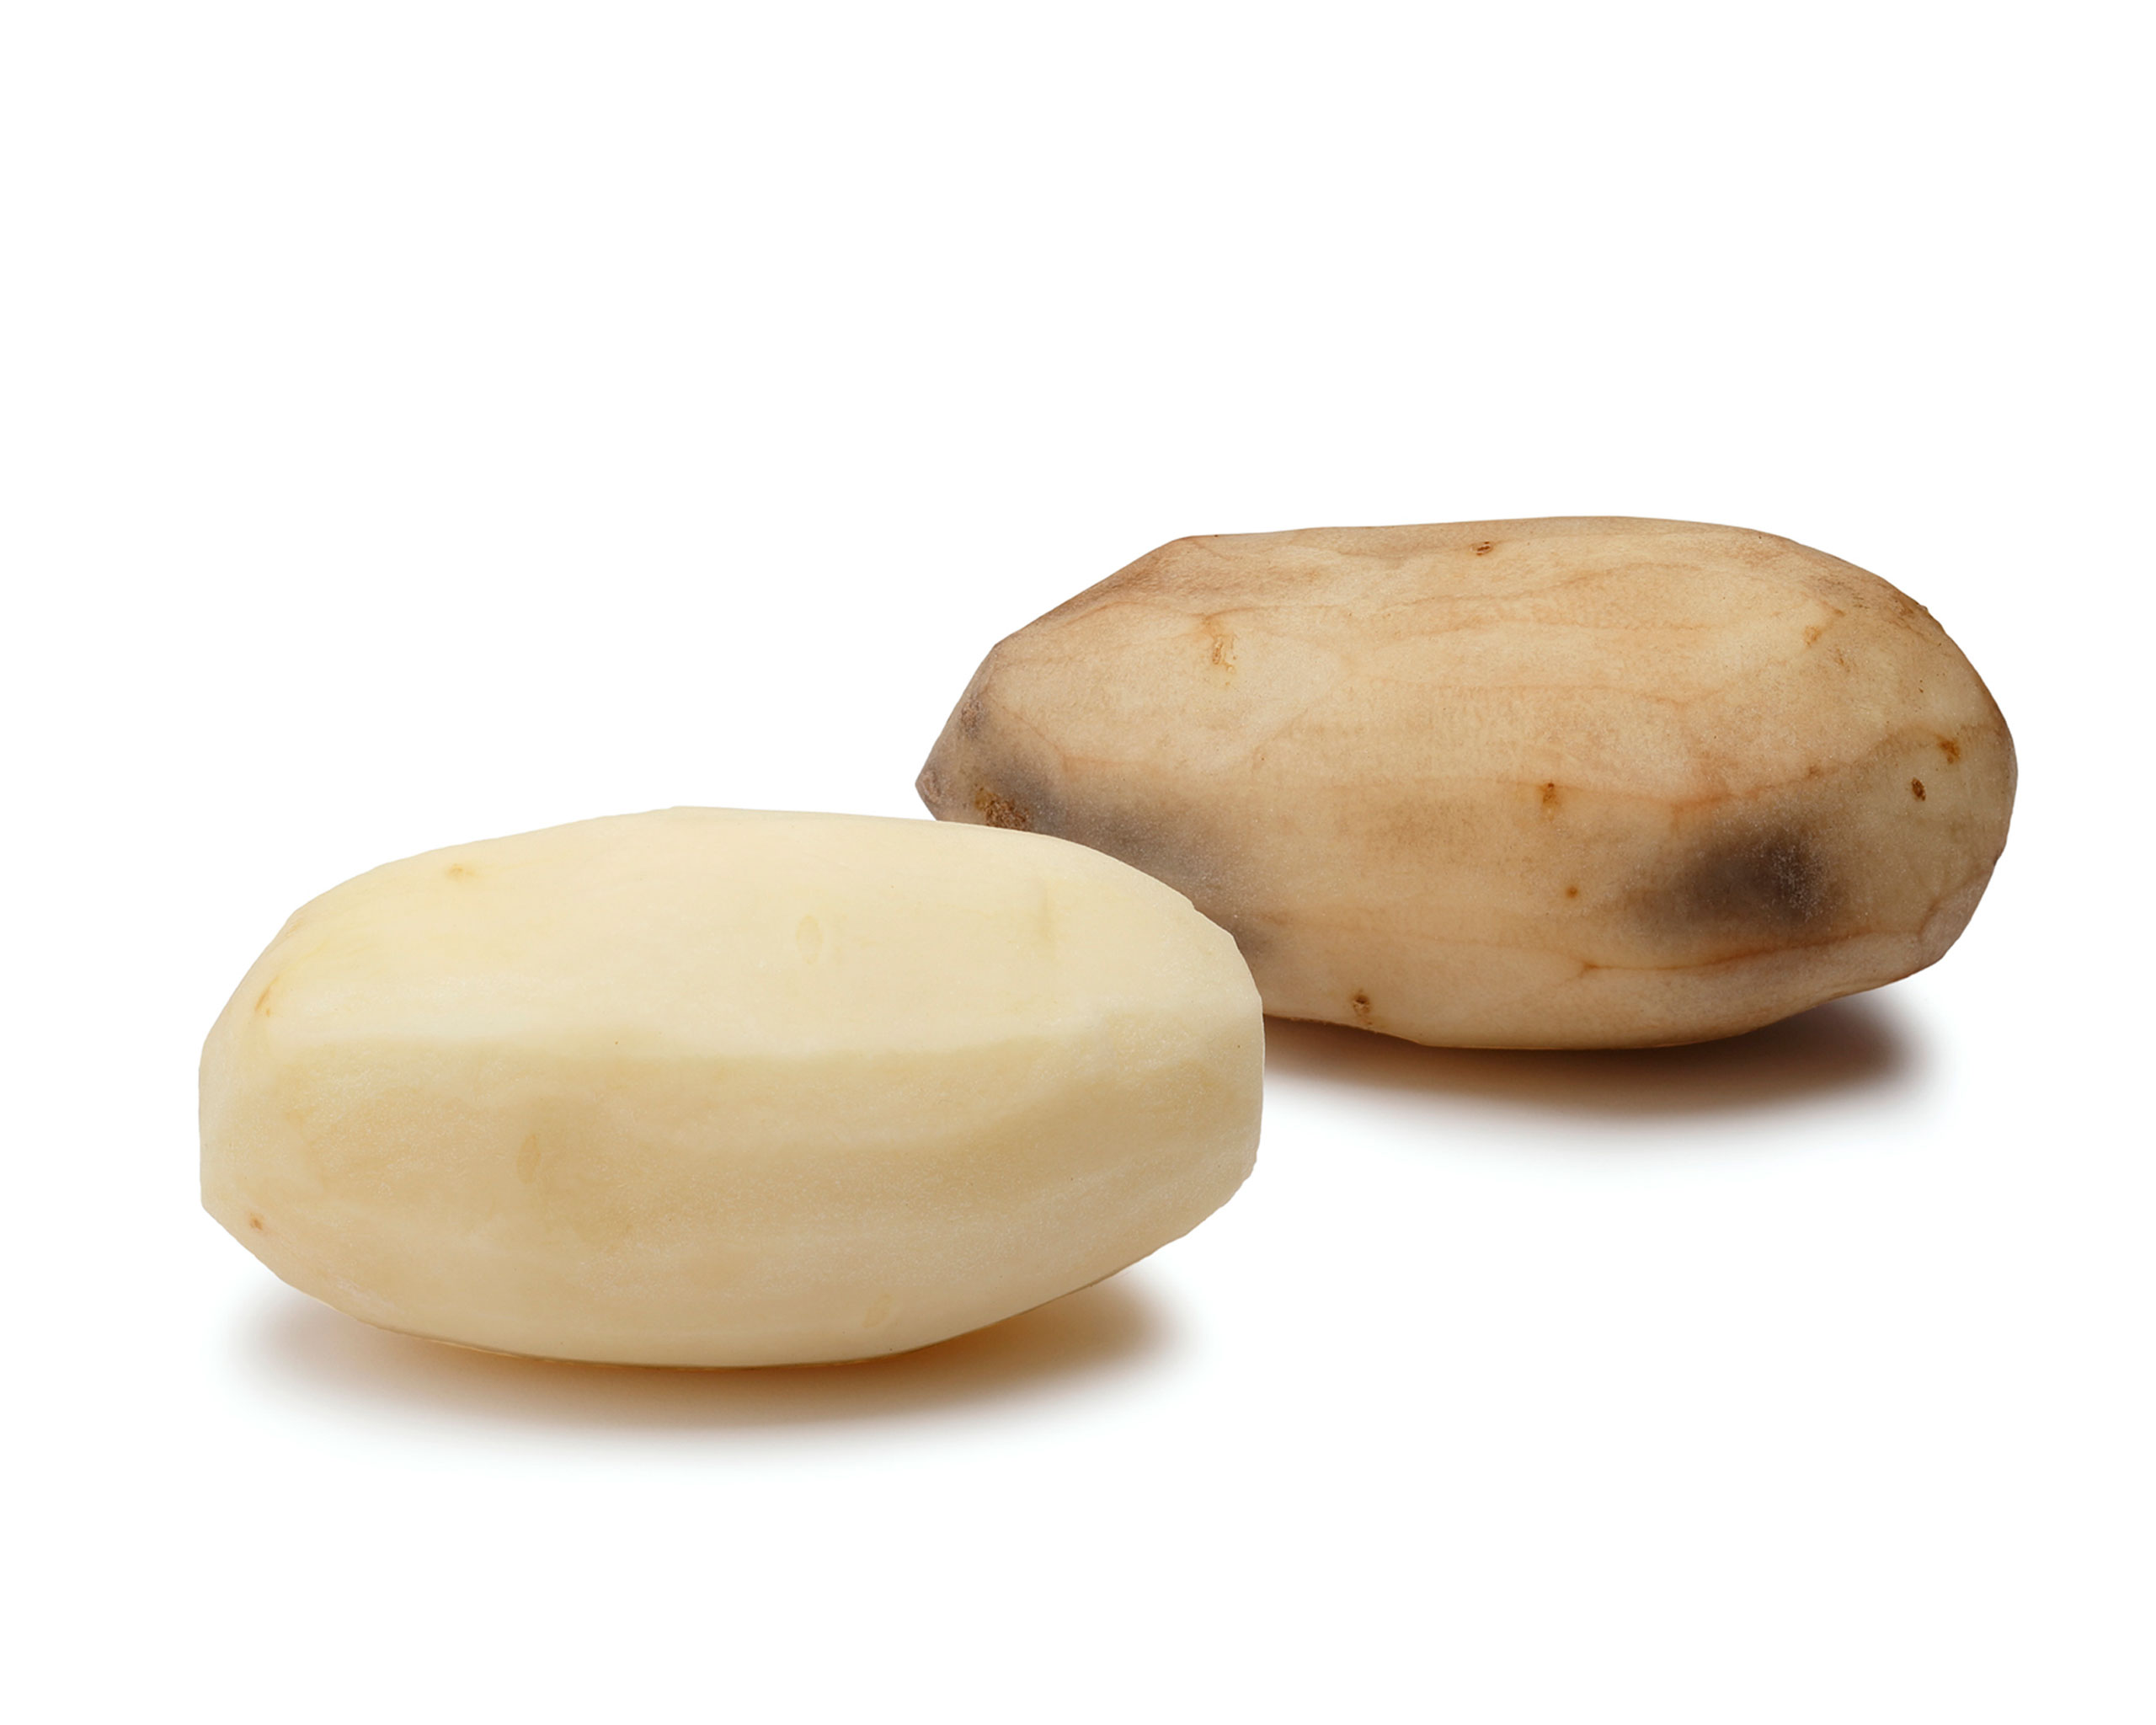 Genetically modified potatoes from the Simplot Corporation. The Food and Drug Administration (FDA) approved the genetically engineered foods as safe, saying they are as nutritious as their conventional counterparts. (Simplot Corporation/AP)